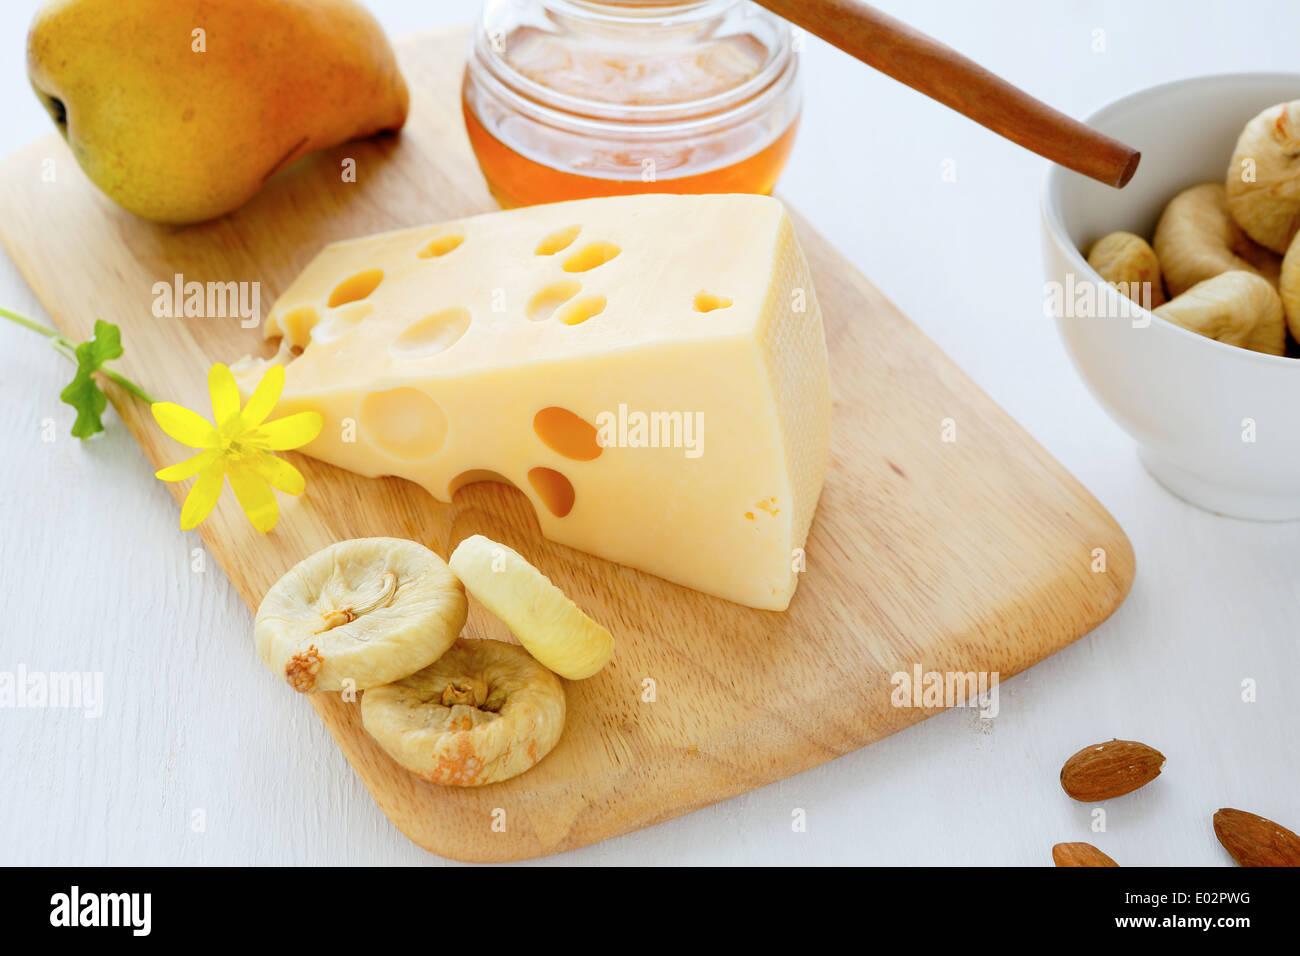 cheese with honey, food closeup Stock Photo